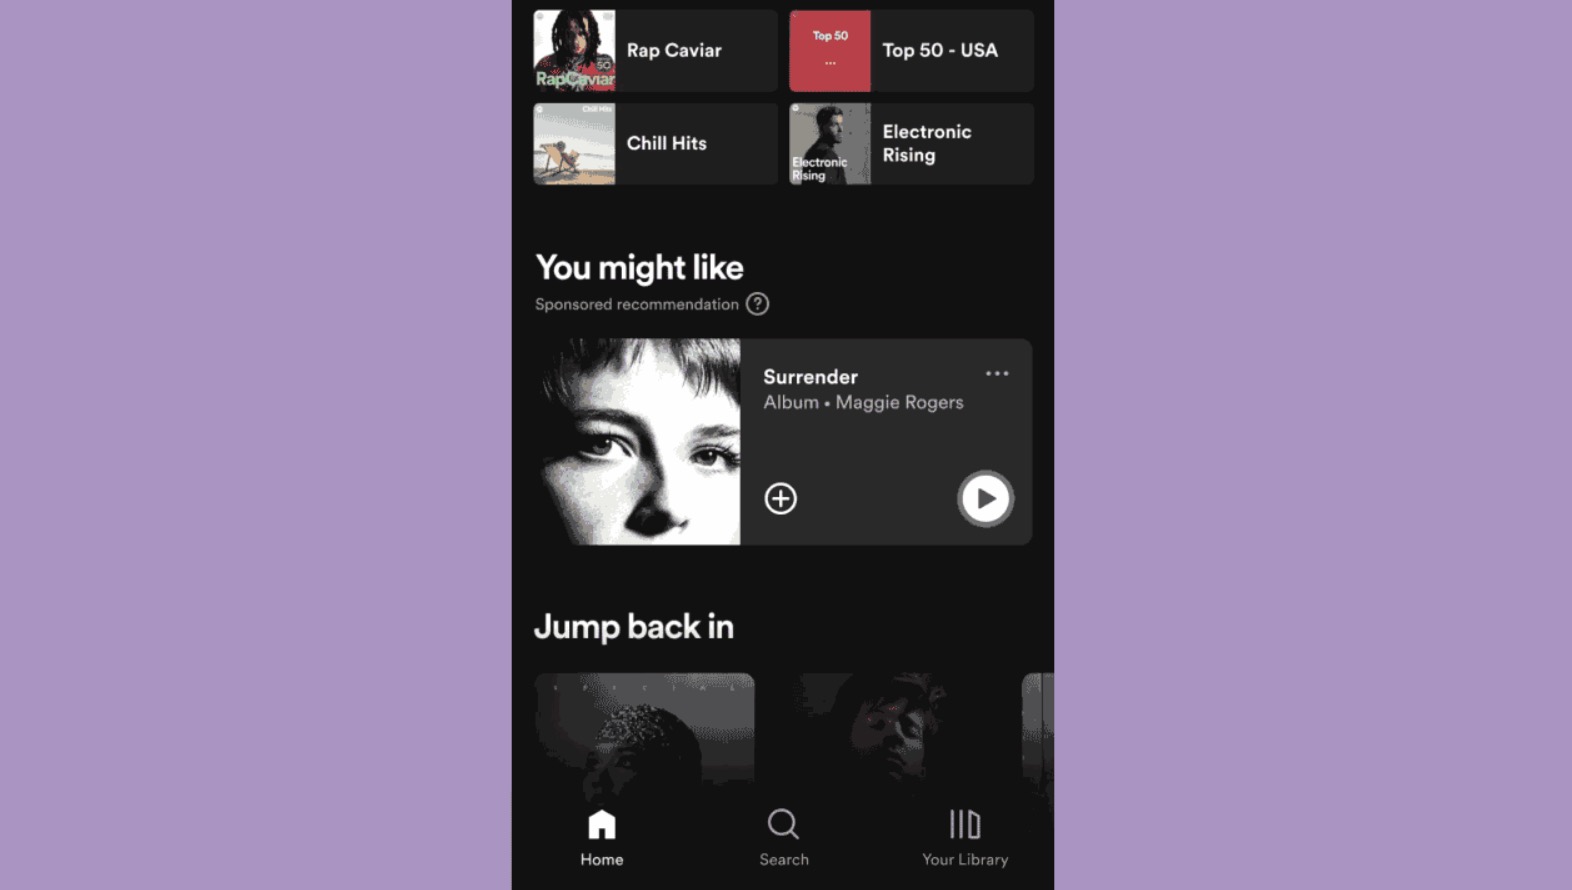 Spotify’s new Showcase tool lets artists pay to promote their music in the Home feed